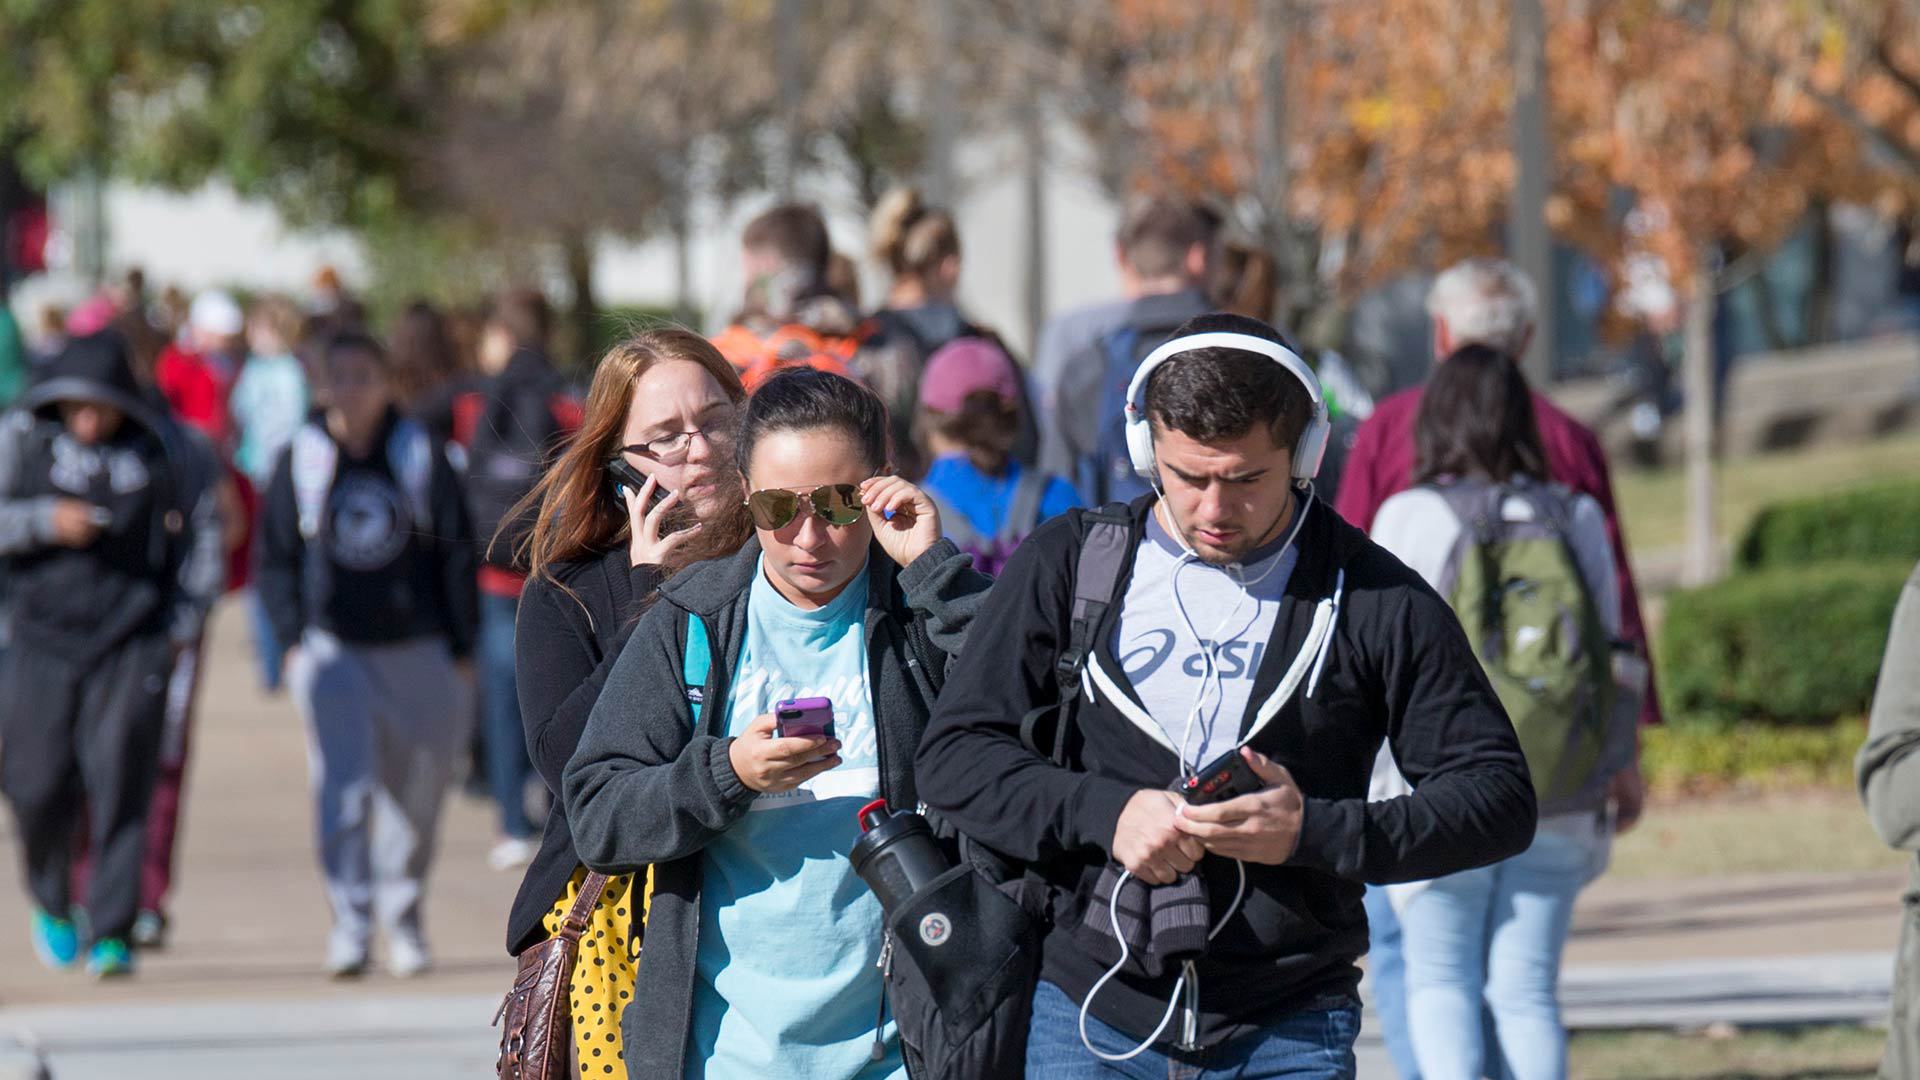 Students walking across campus using their smartphones